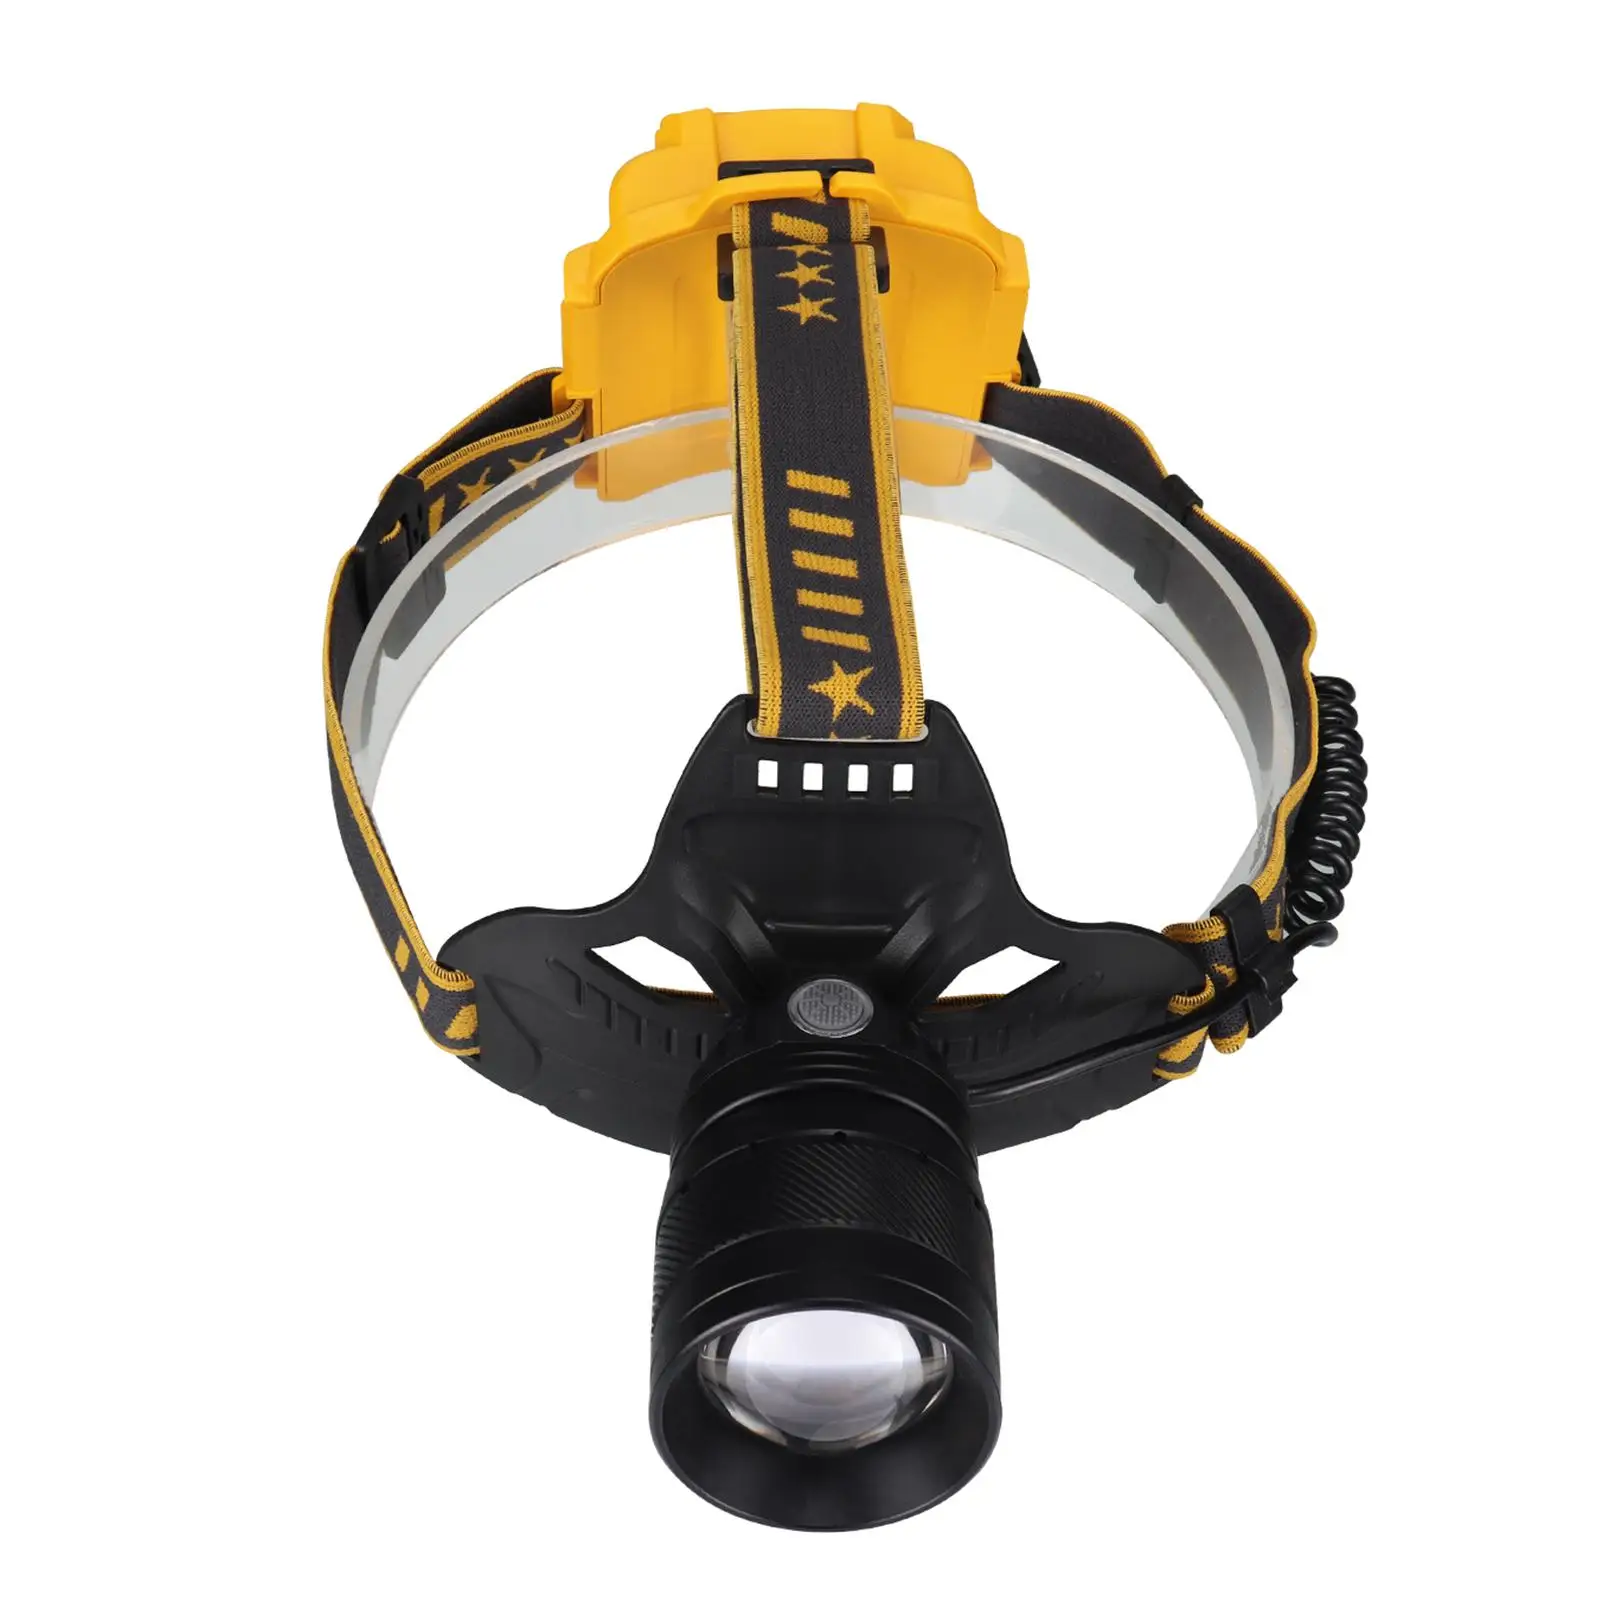 LED Rechargeable Headlamp Waterproof Outdoor Super Bright Camping for Hiking